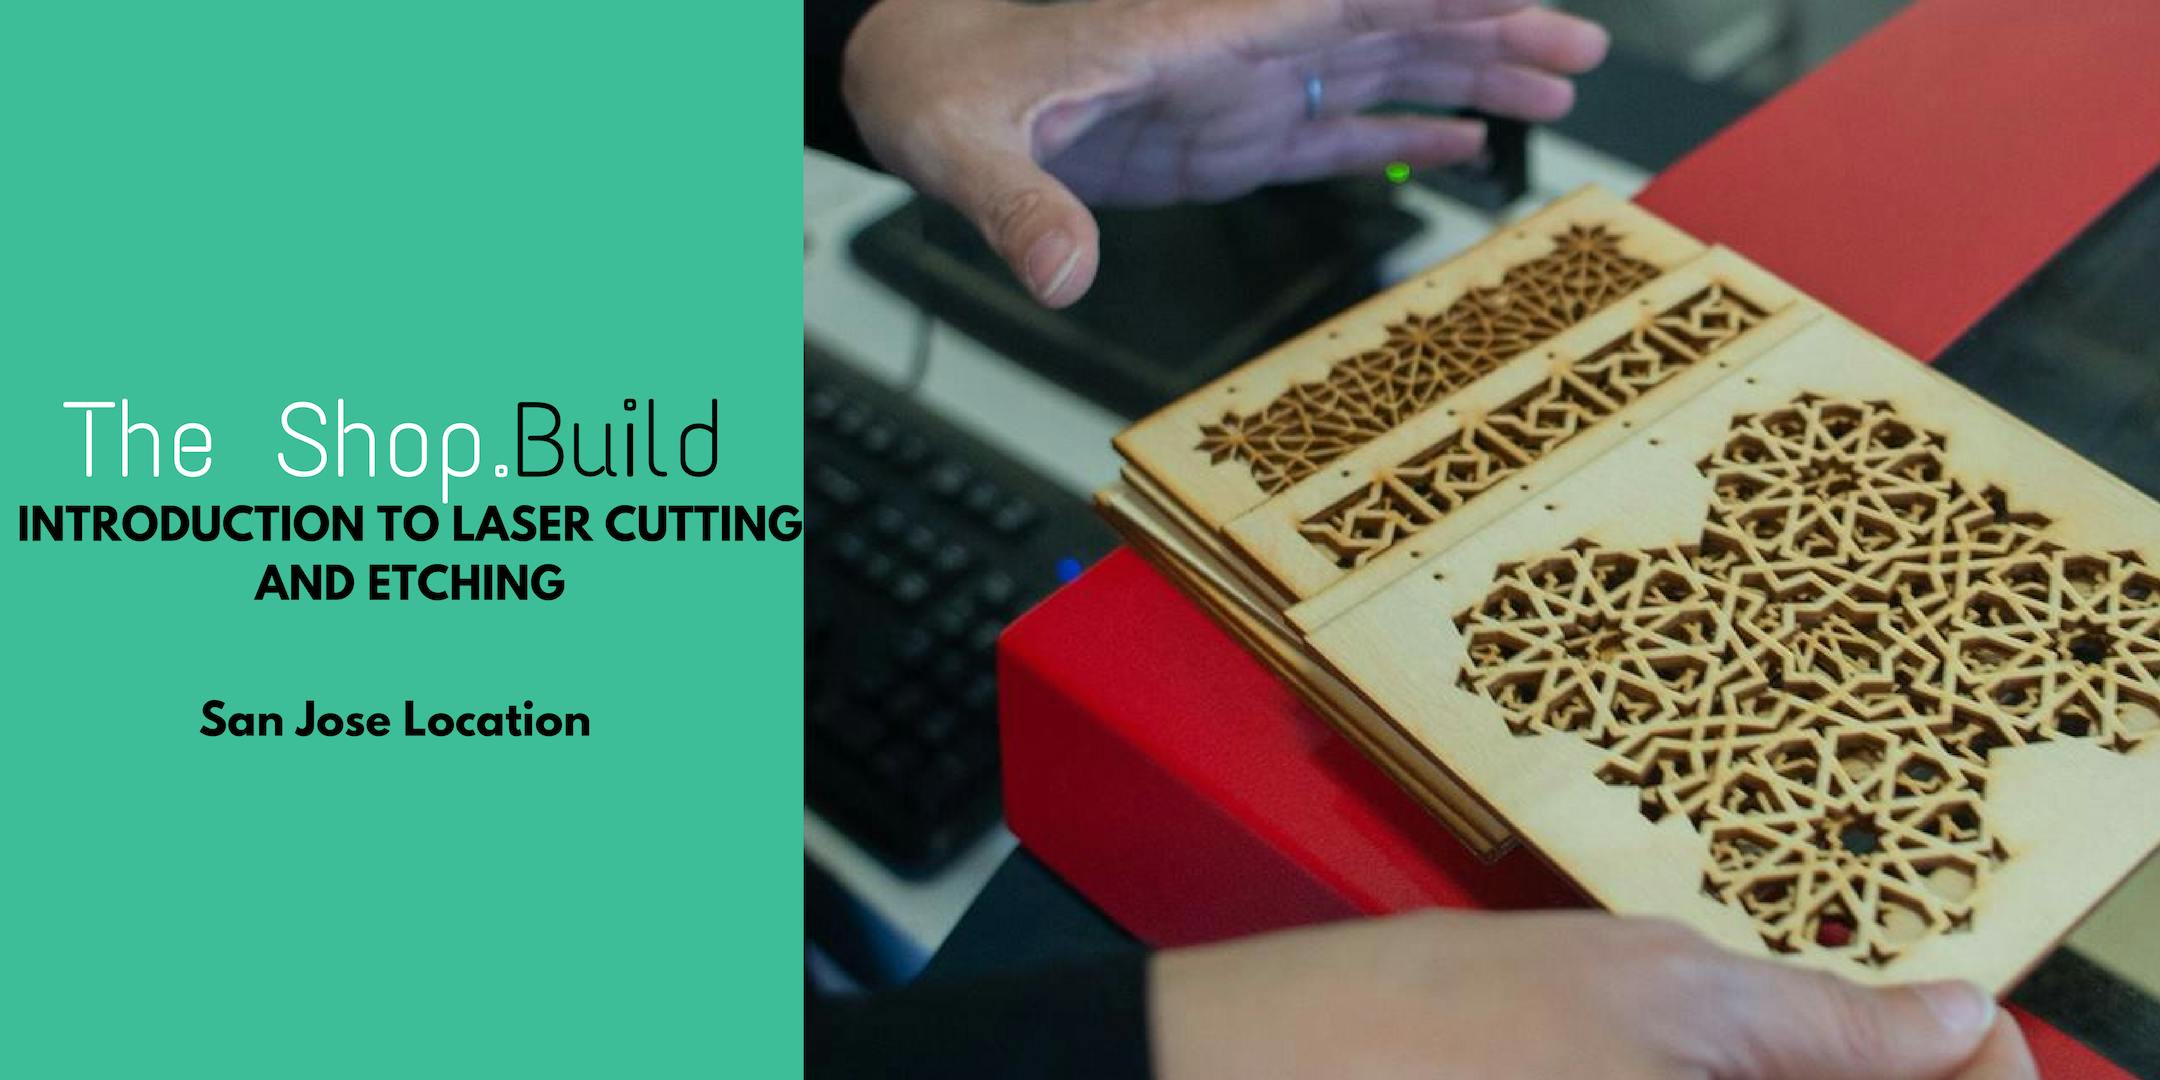 INTRODUCTION TO LASER CUTTING AND ETCHING